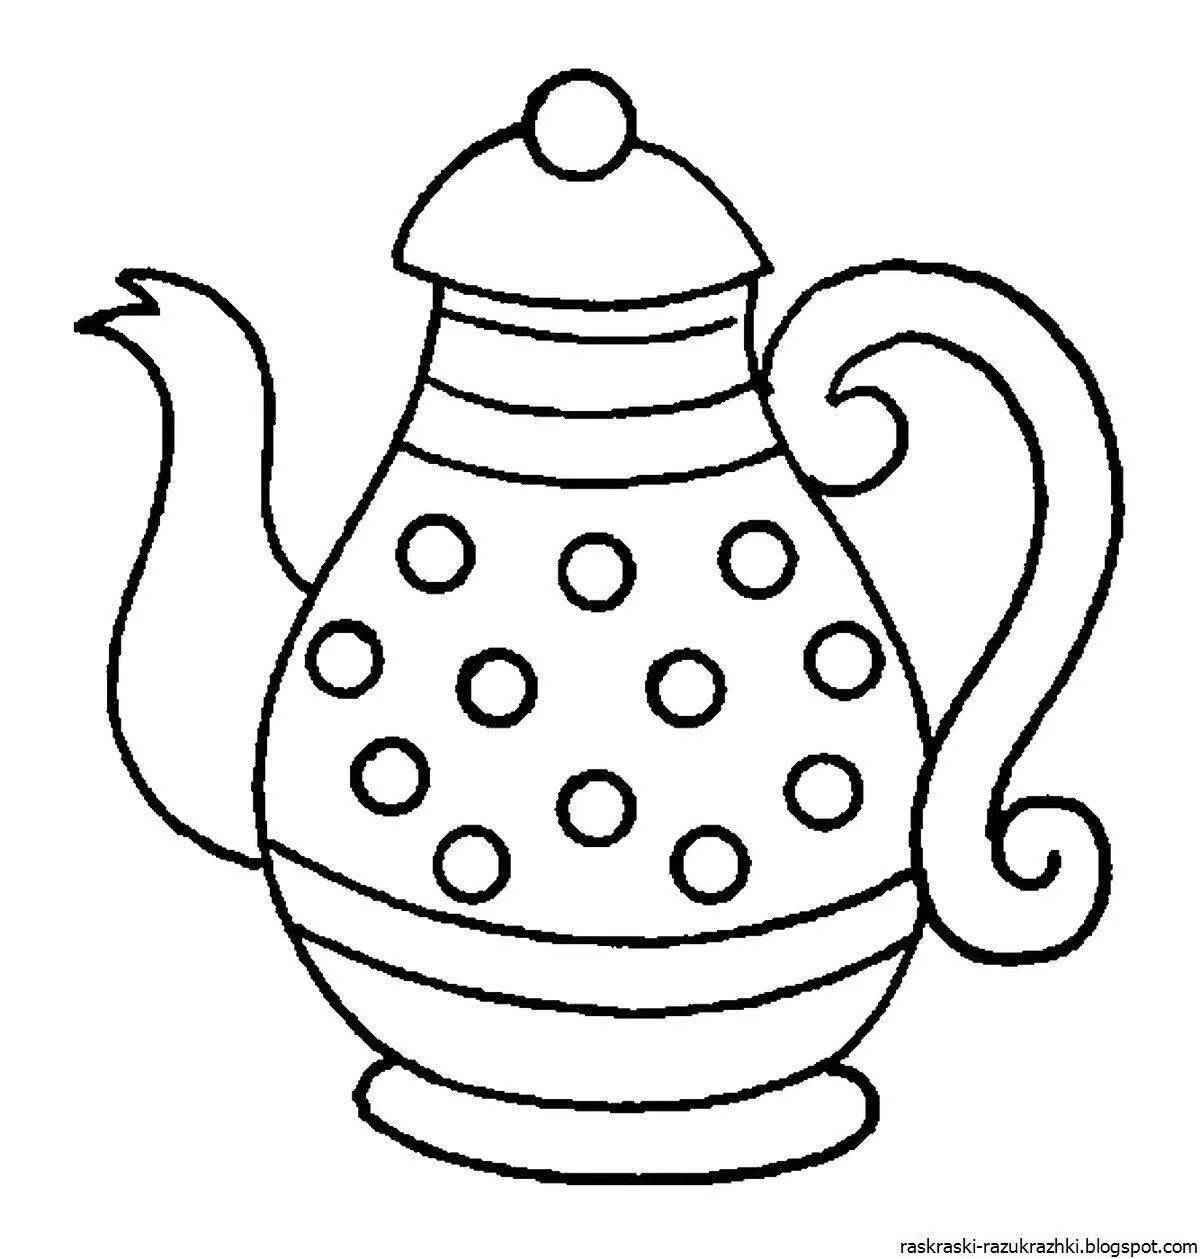 Wonderful teapot coloring book for children 2-3 years old